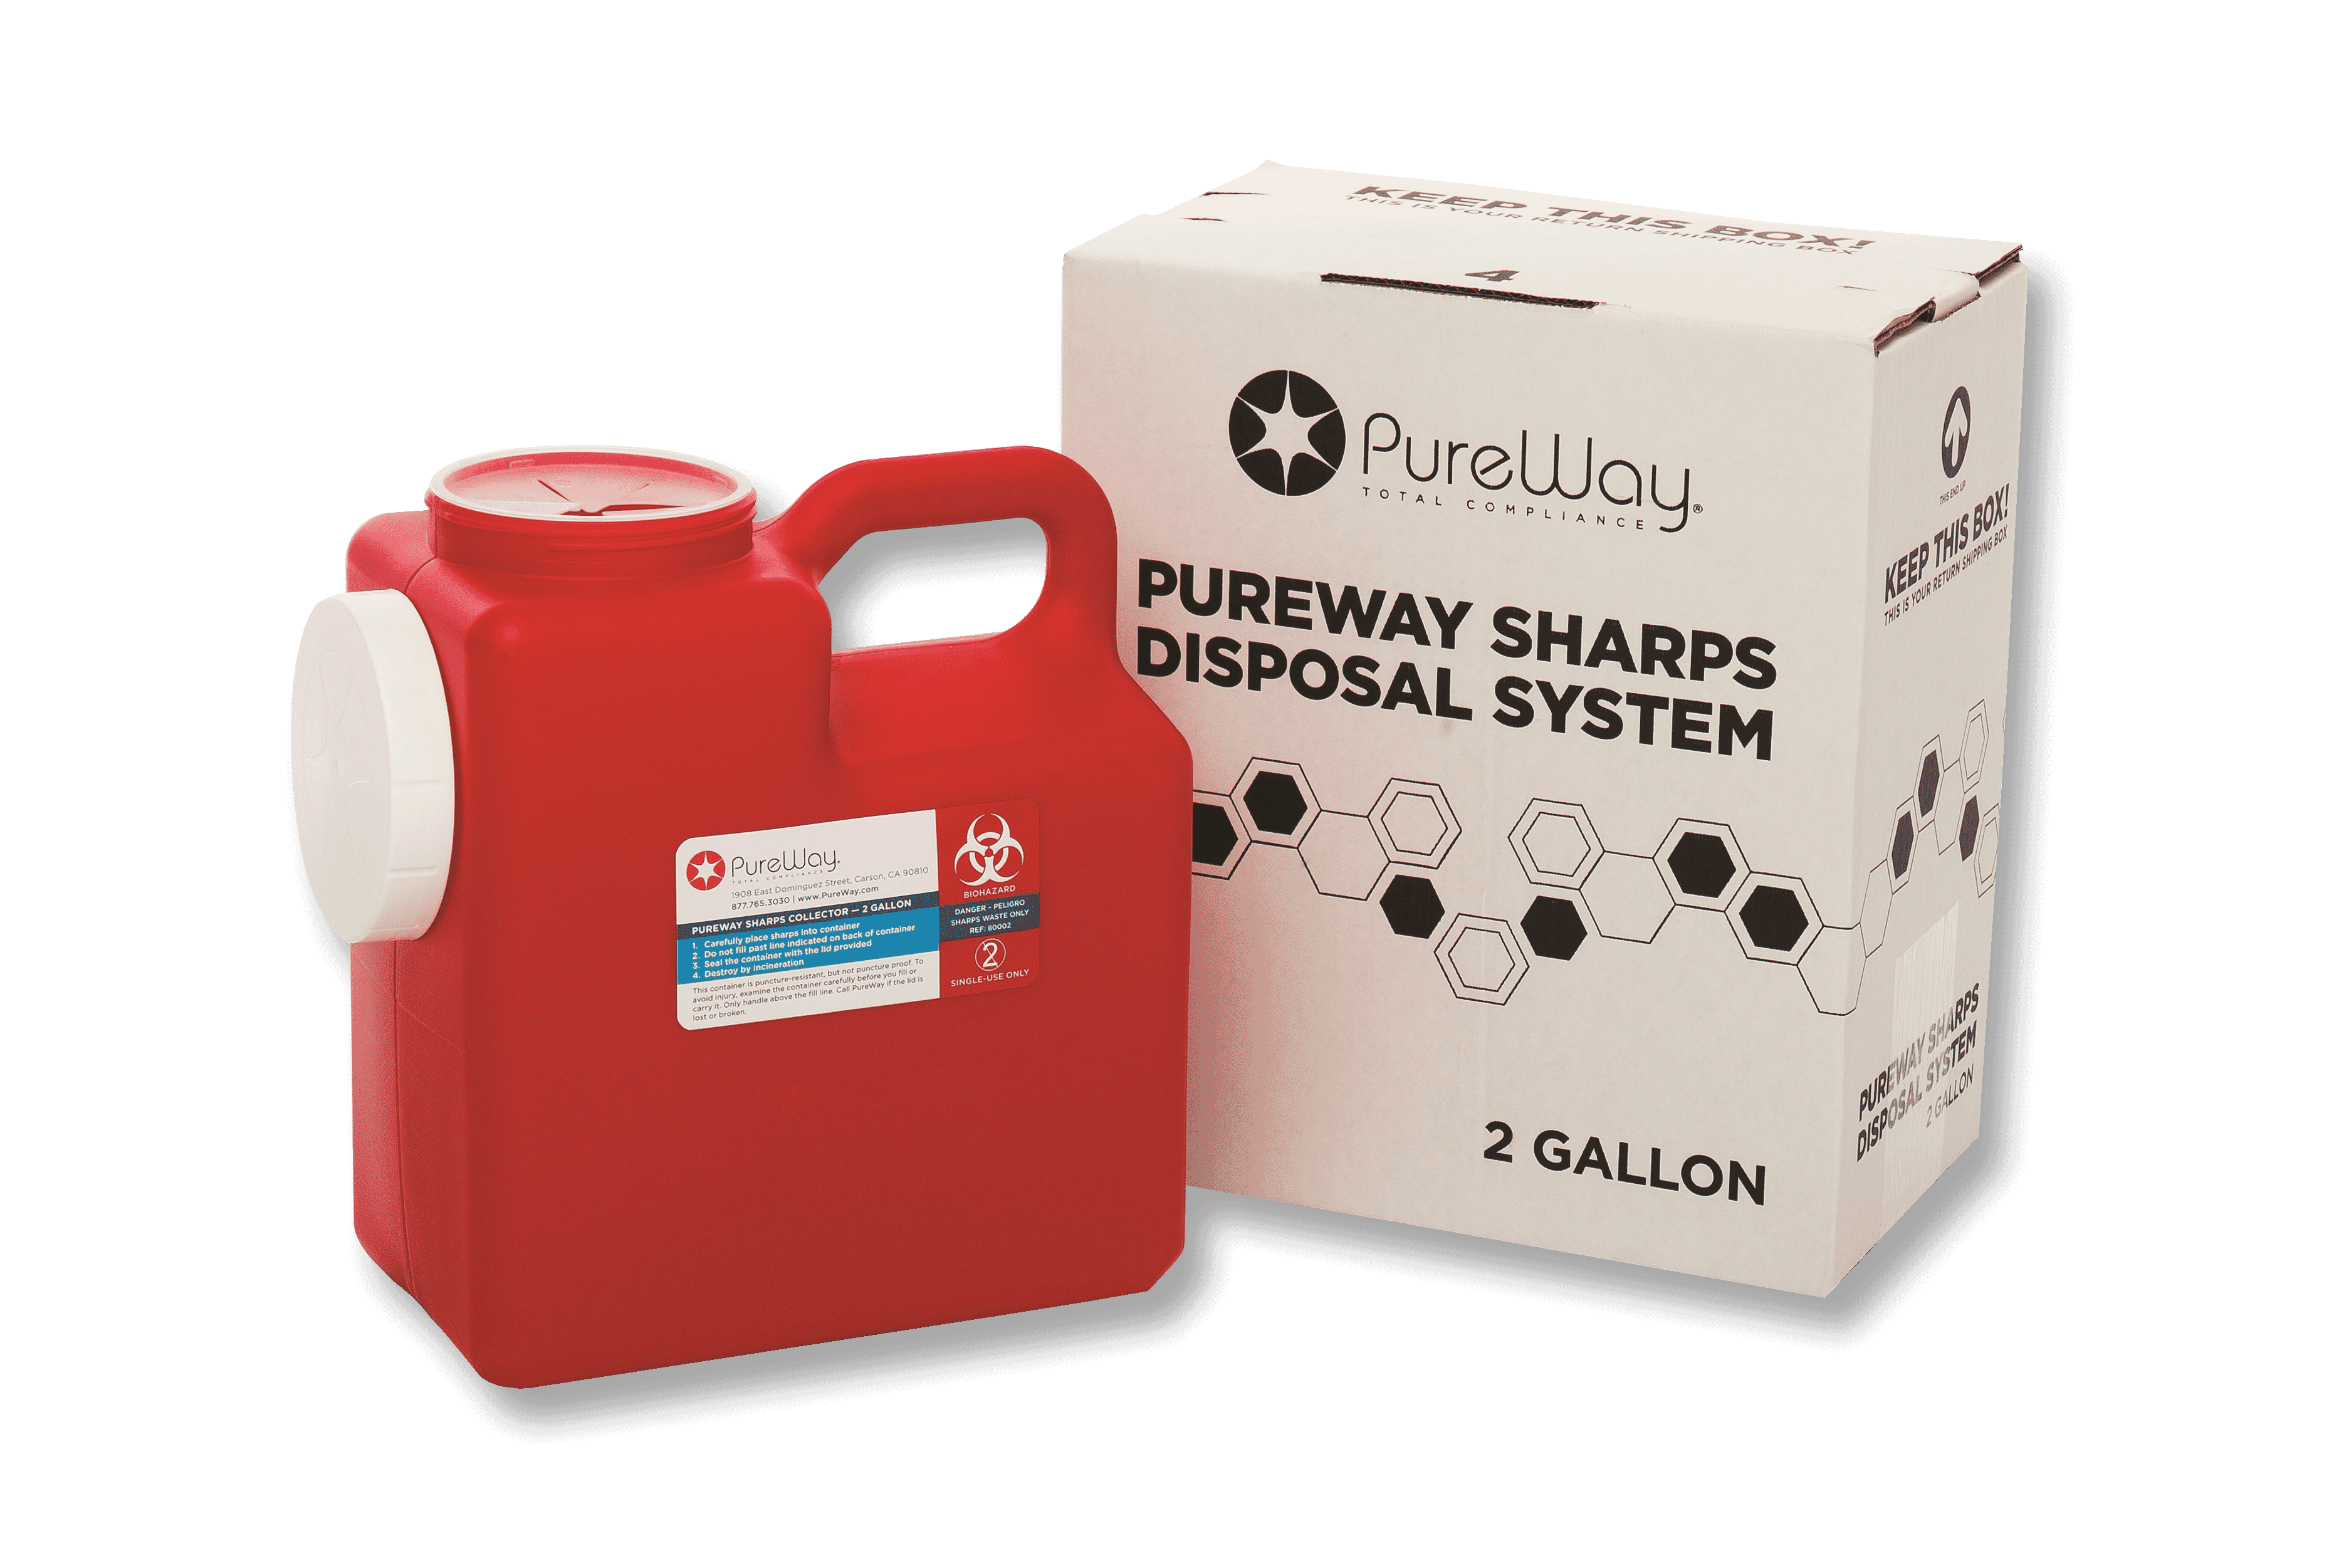 2 Gallon Sharps Container Disposal System Product Photo